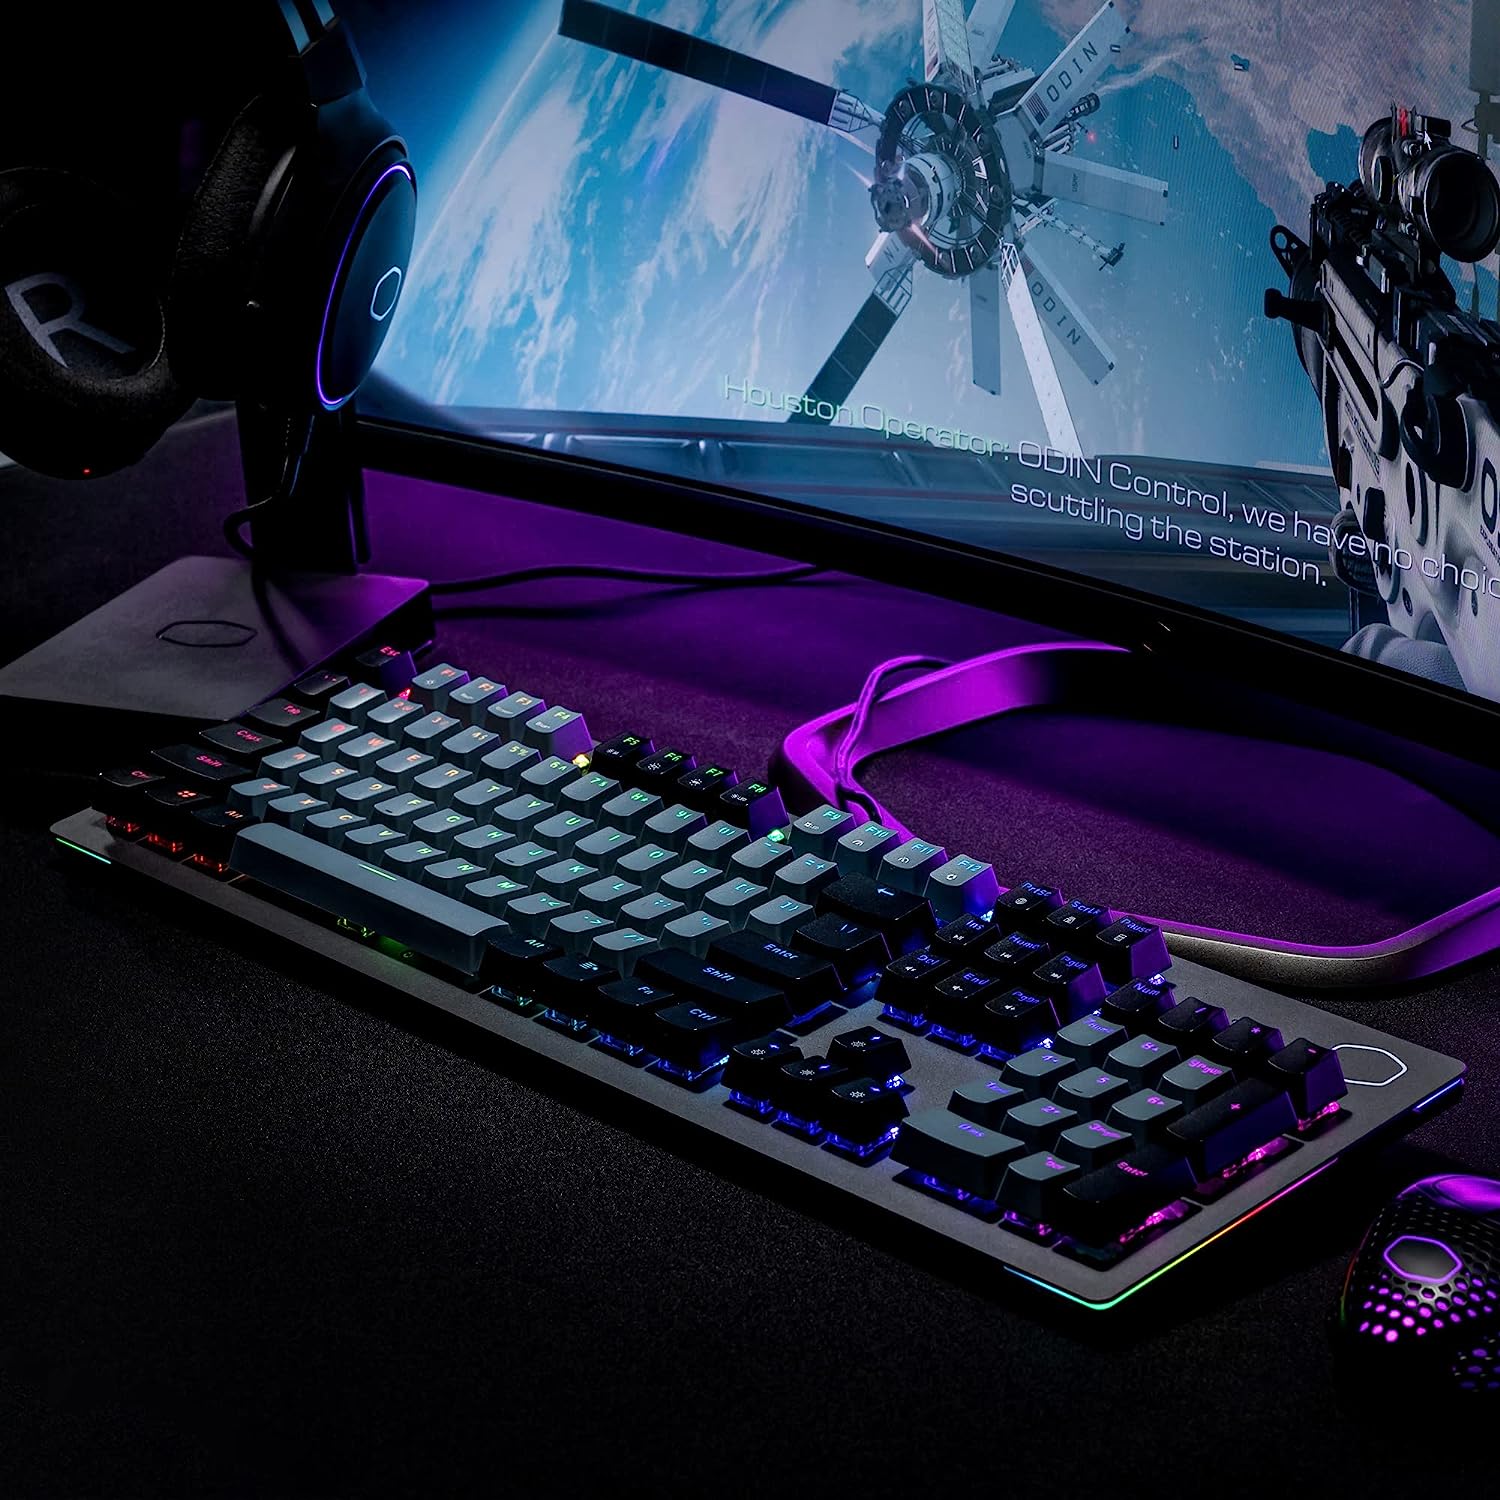 Cooler Master CK352 Gaming Mechanical Keyboard Blue Switch with RGB Backlighting